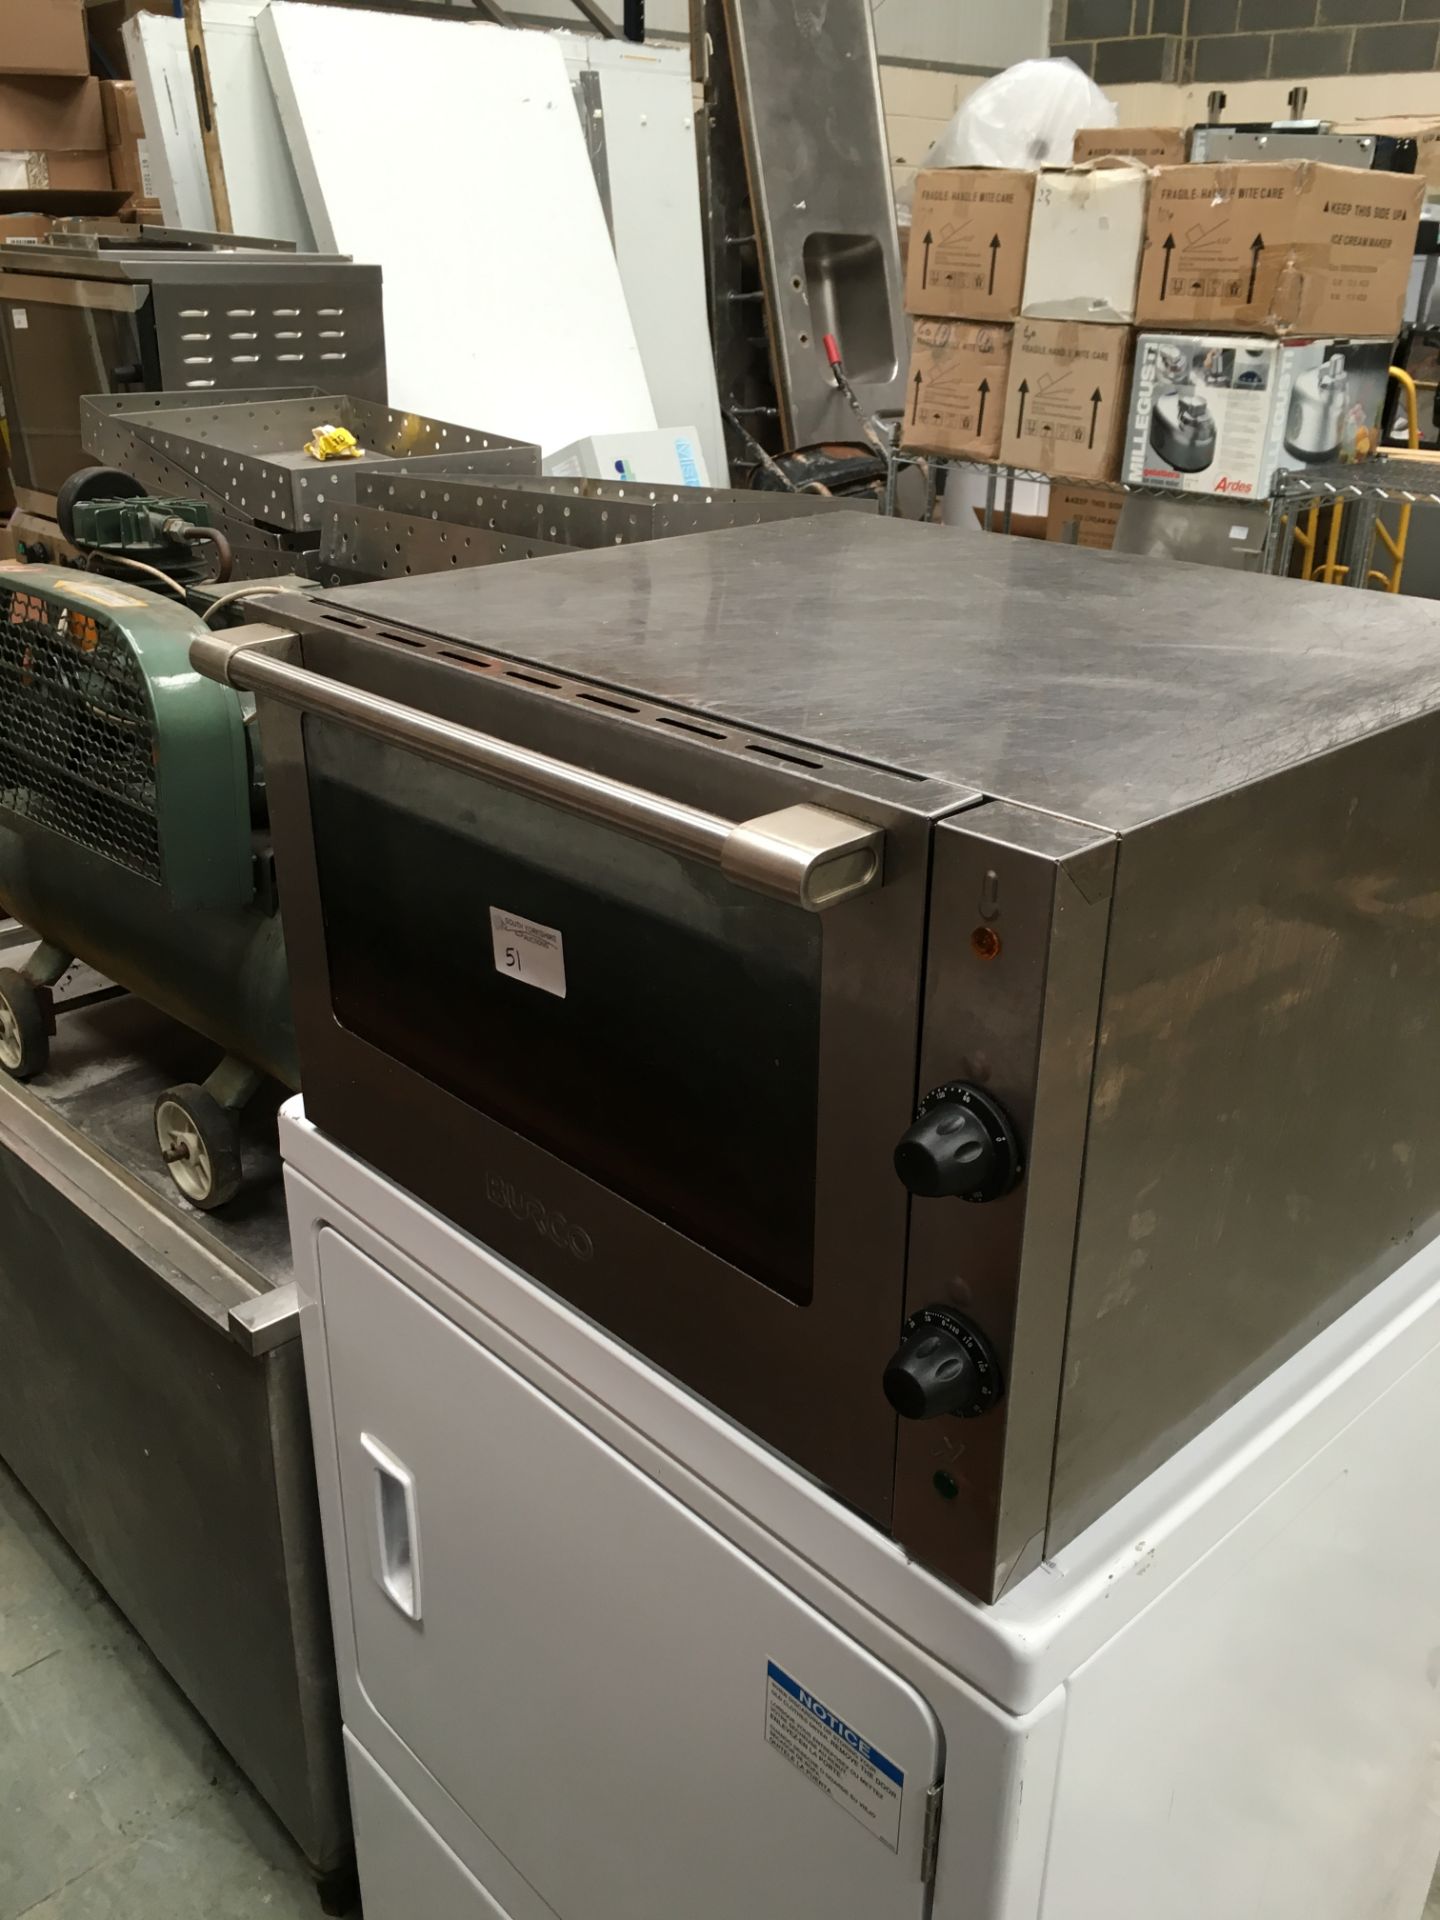 Burco Table Top Convection Oven - Image 2 of 3